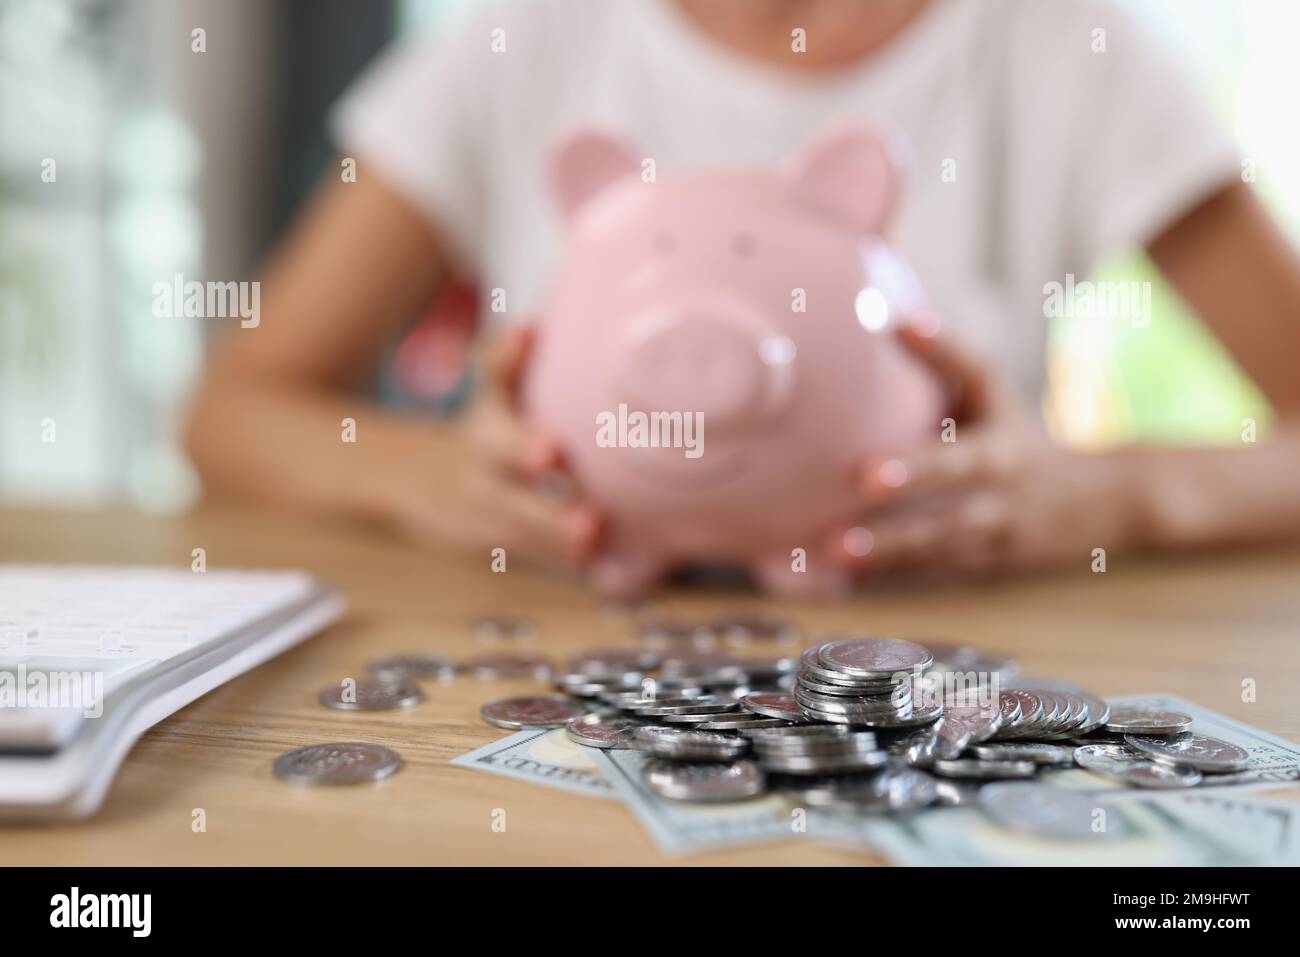 Banknotes and coins on table and blurry woman with piggy bank in background. Stock Photo